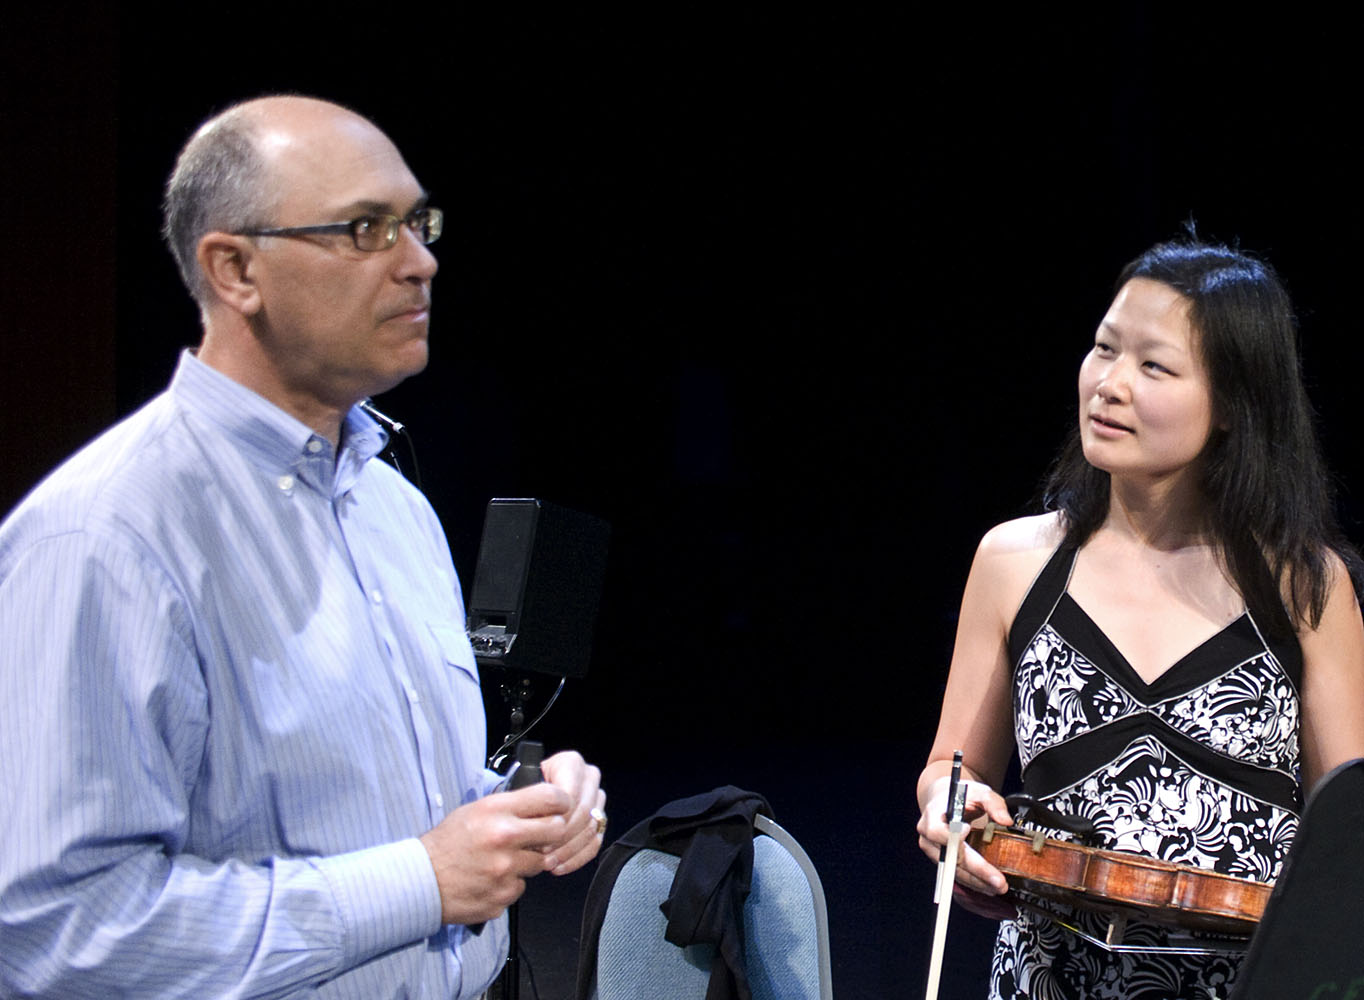 Composer David Felder Discussing His Piece Another Face With Violinist Lina Bahn  2